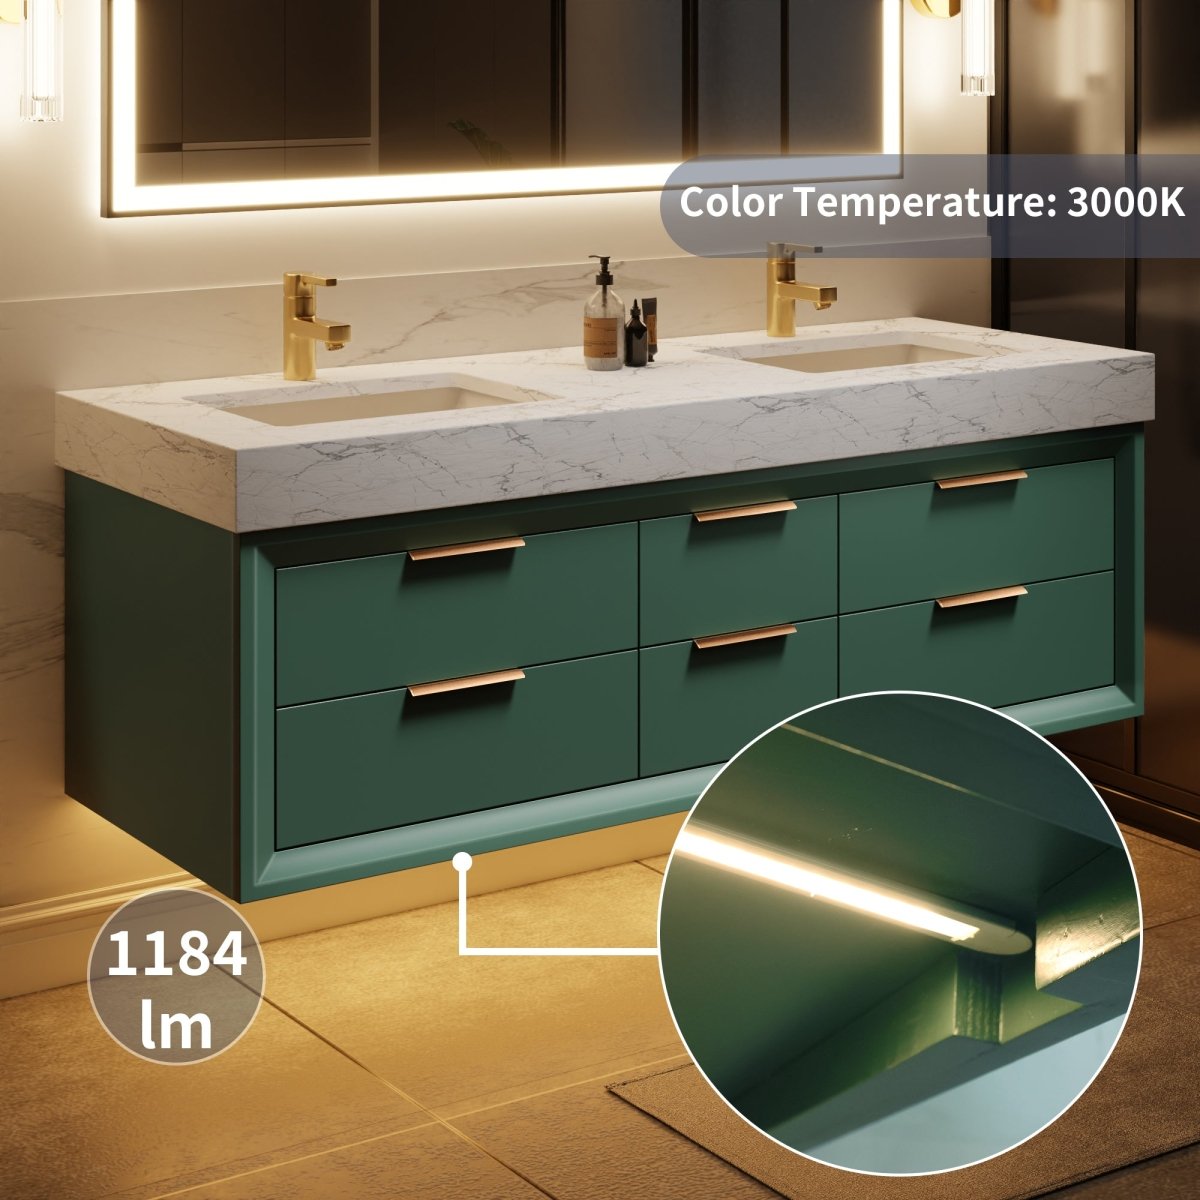 Glam 60" Modern Floating Rubberwood Bathroom Vanity Cabinet with Lights and Stone Slab Countertop in Green